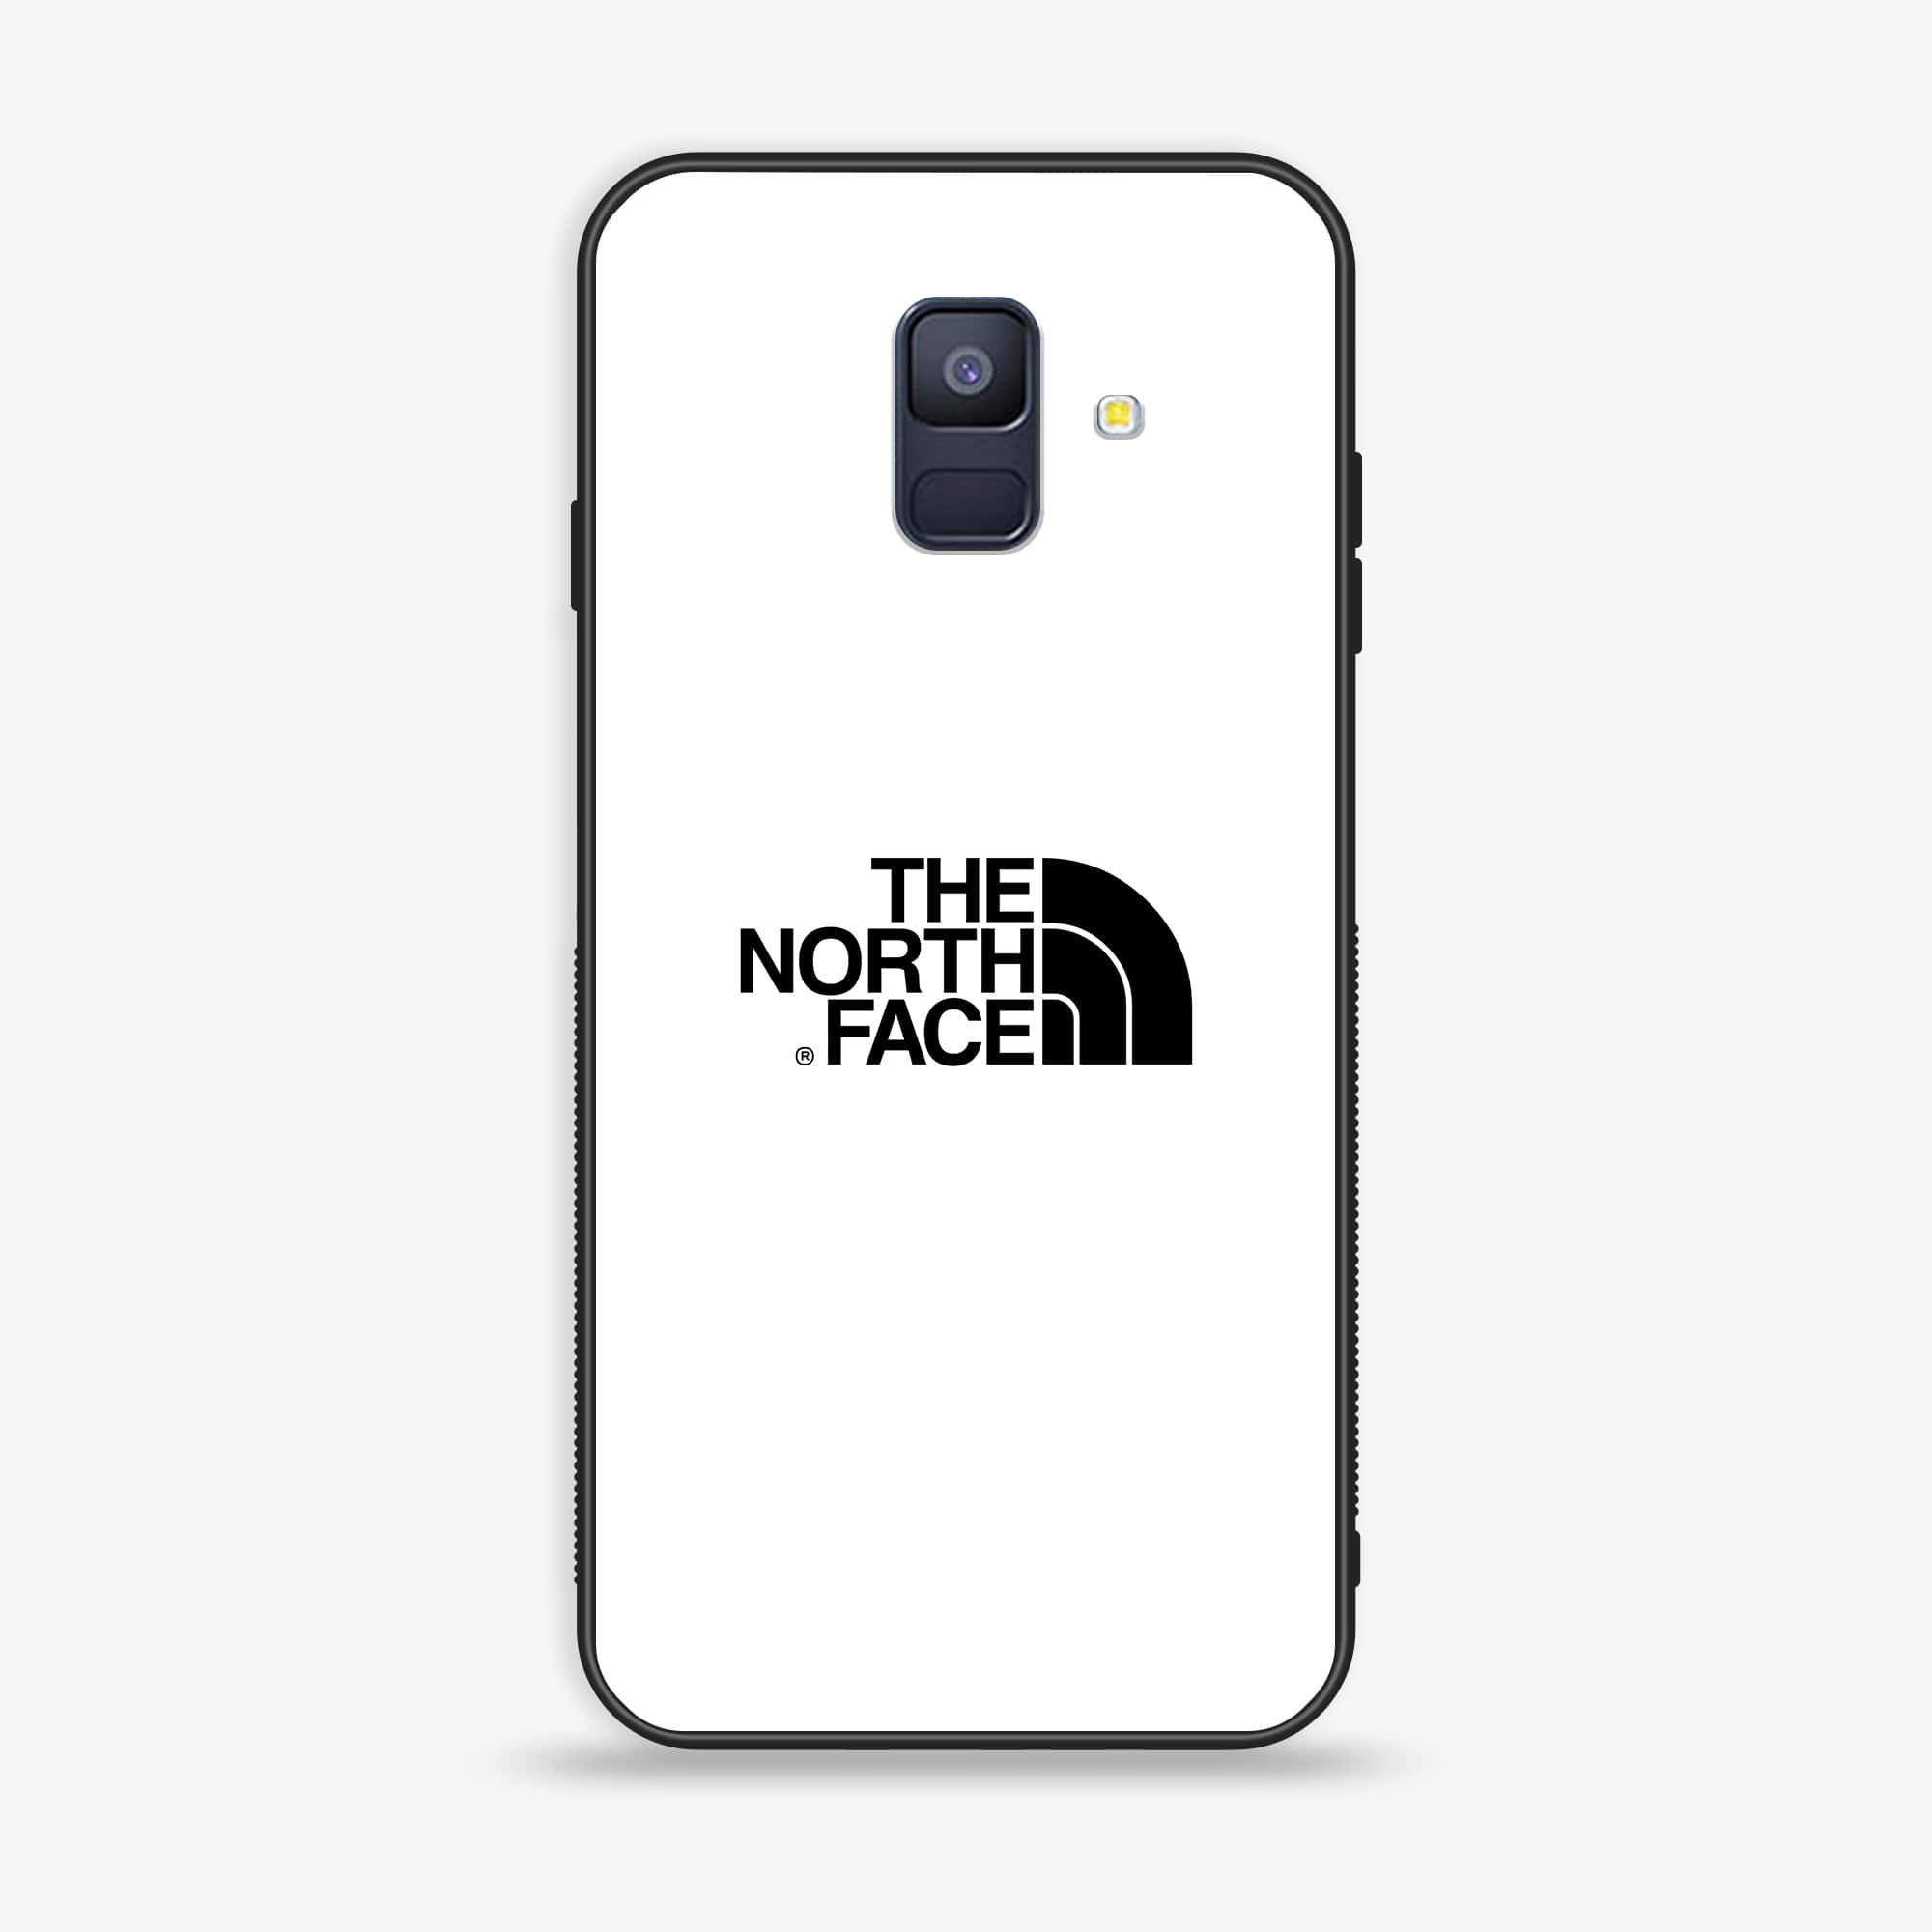 Samsung Galaxy A6 (2018) - The North Face Series - Premium Printed Glass soft Bumper shock Proof Case